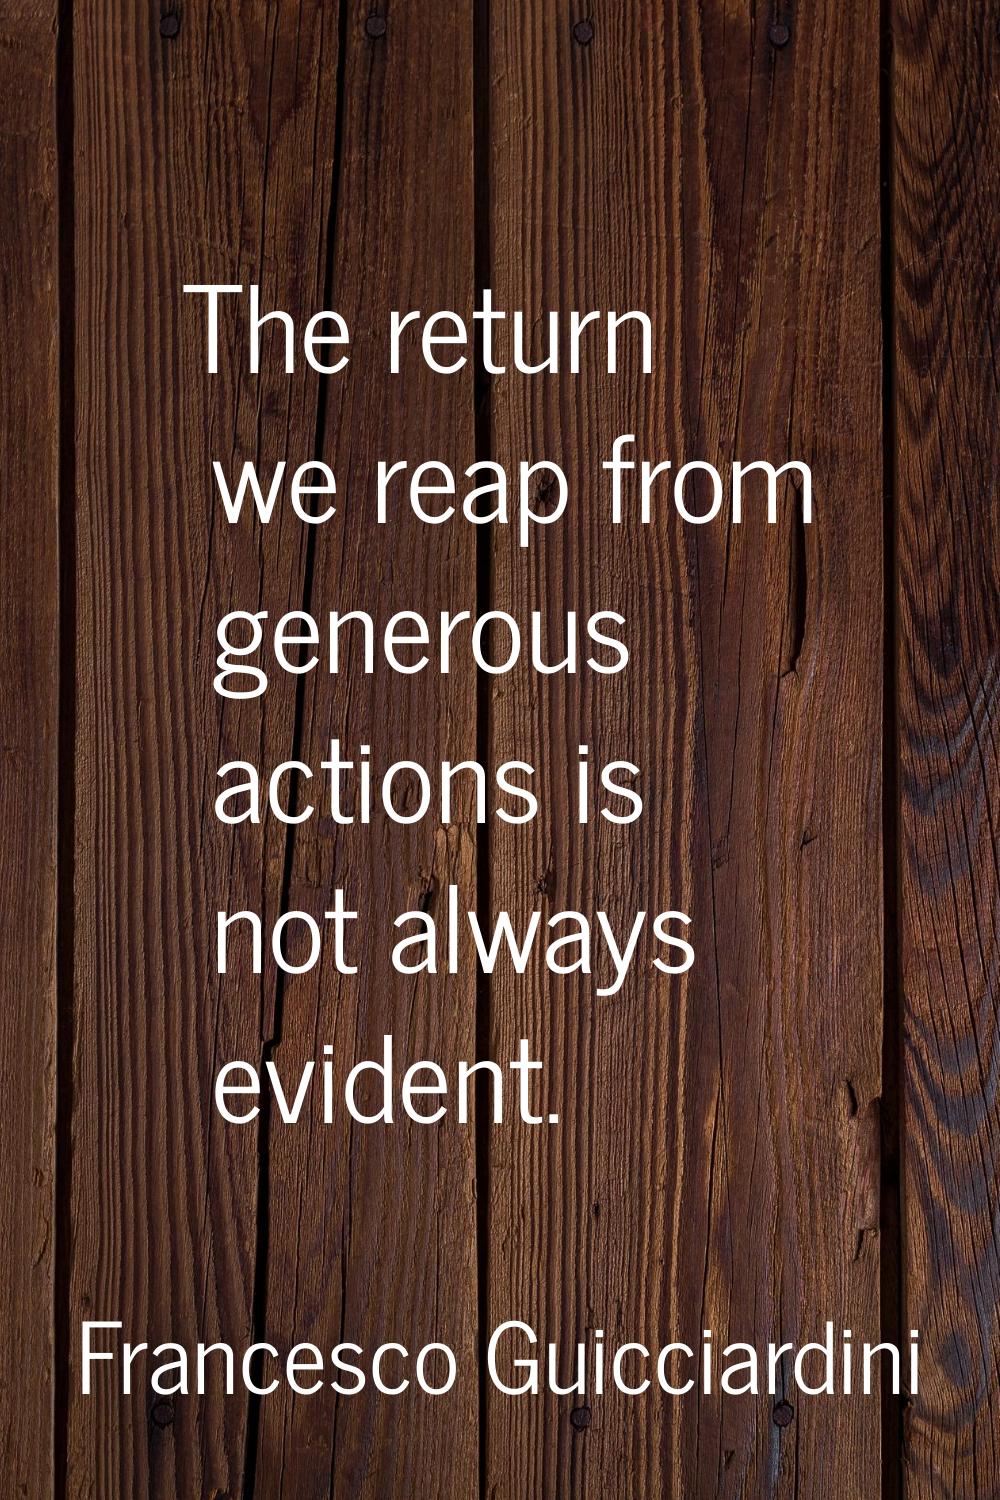 The return we reap from generous actions is not always evident.